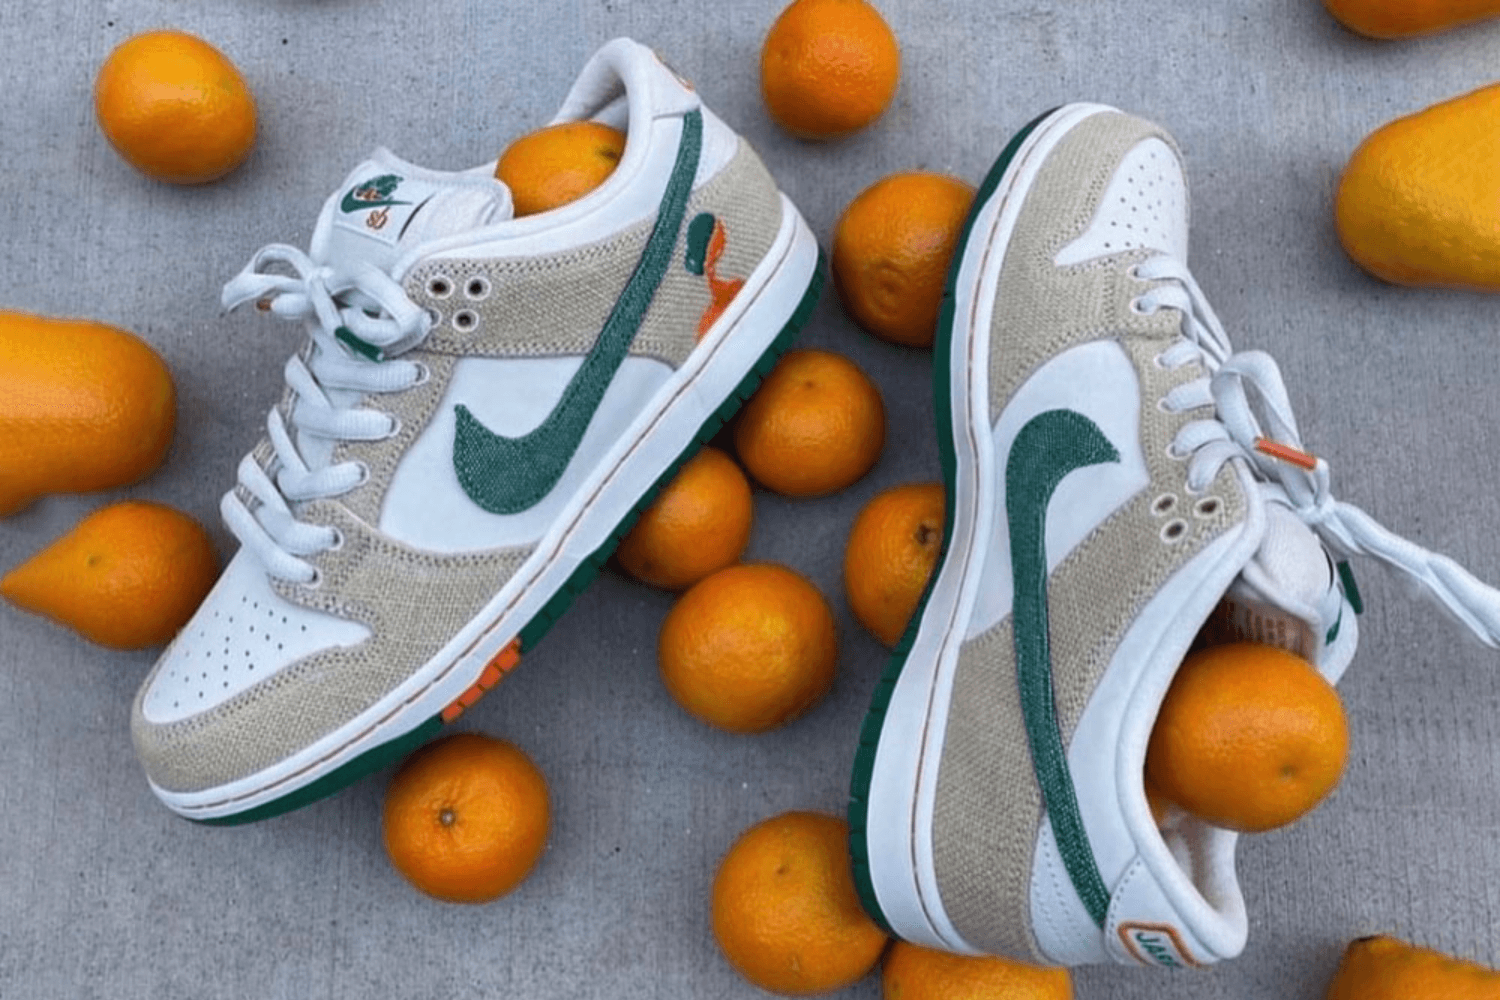 New images of the Jarritos x Nike SB Dunk Low